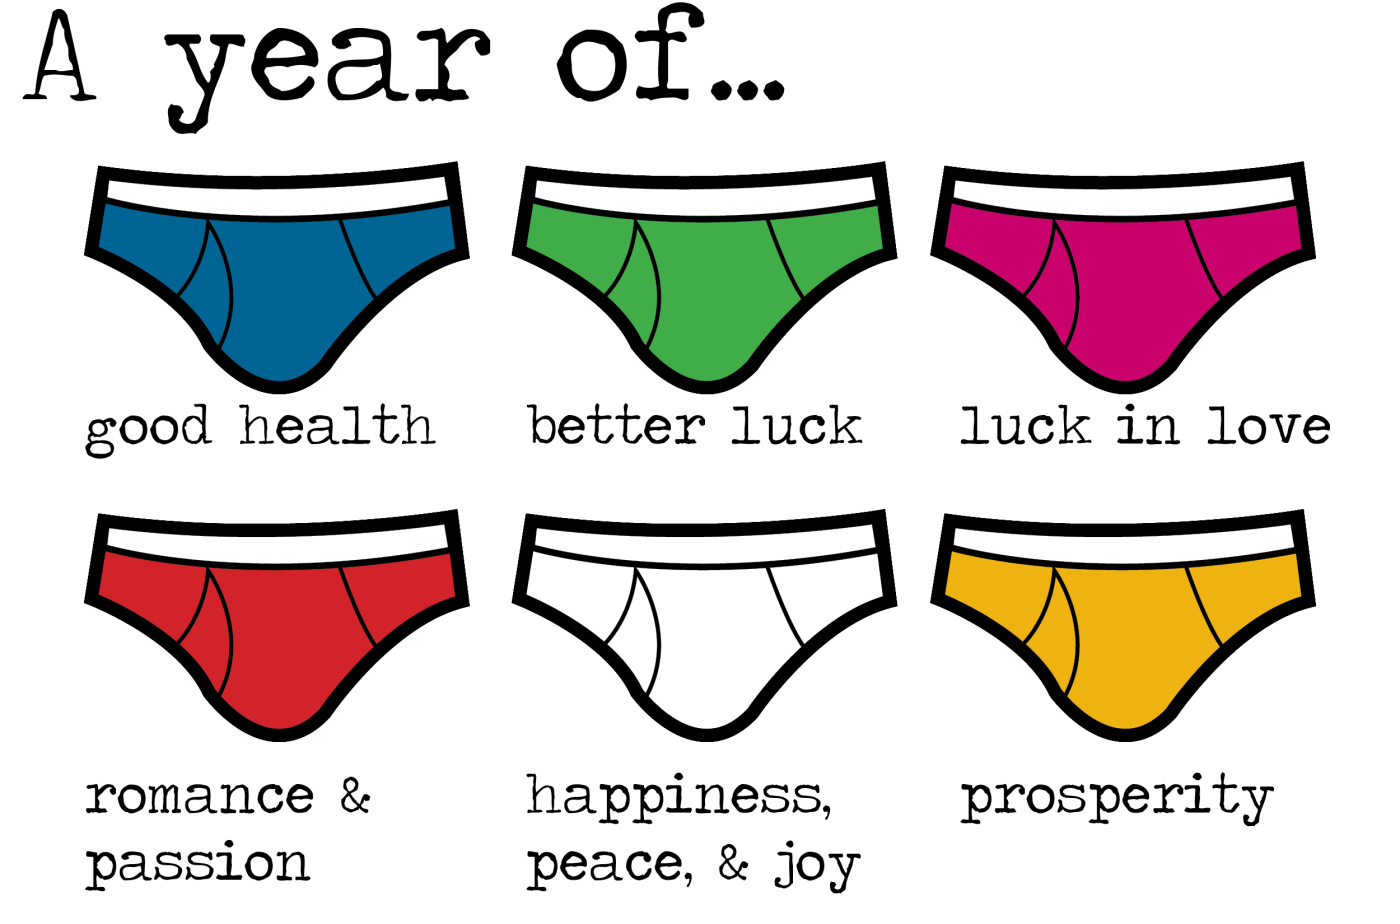 I honestly had no idea underwear color was so significant. Maybe I should stack them because I want it all for 2019.